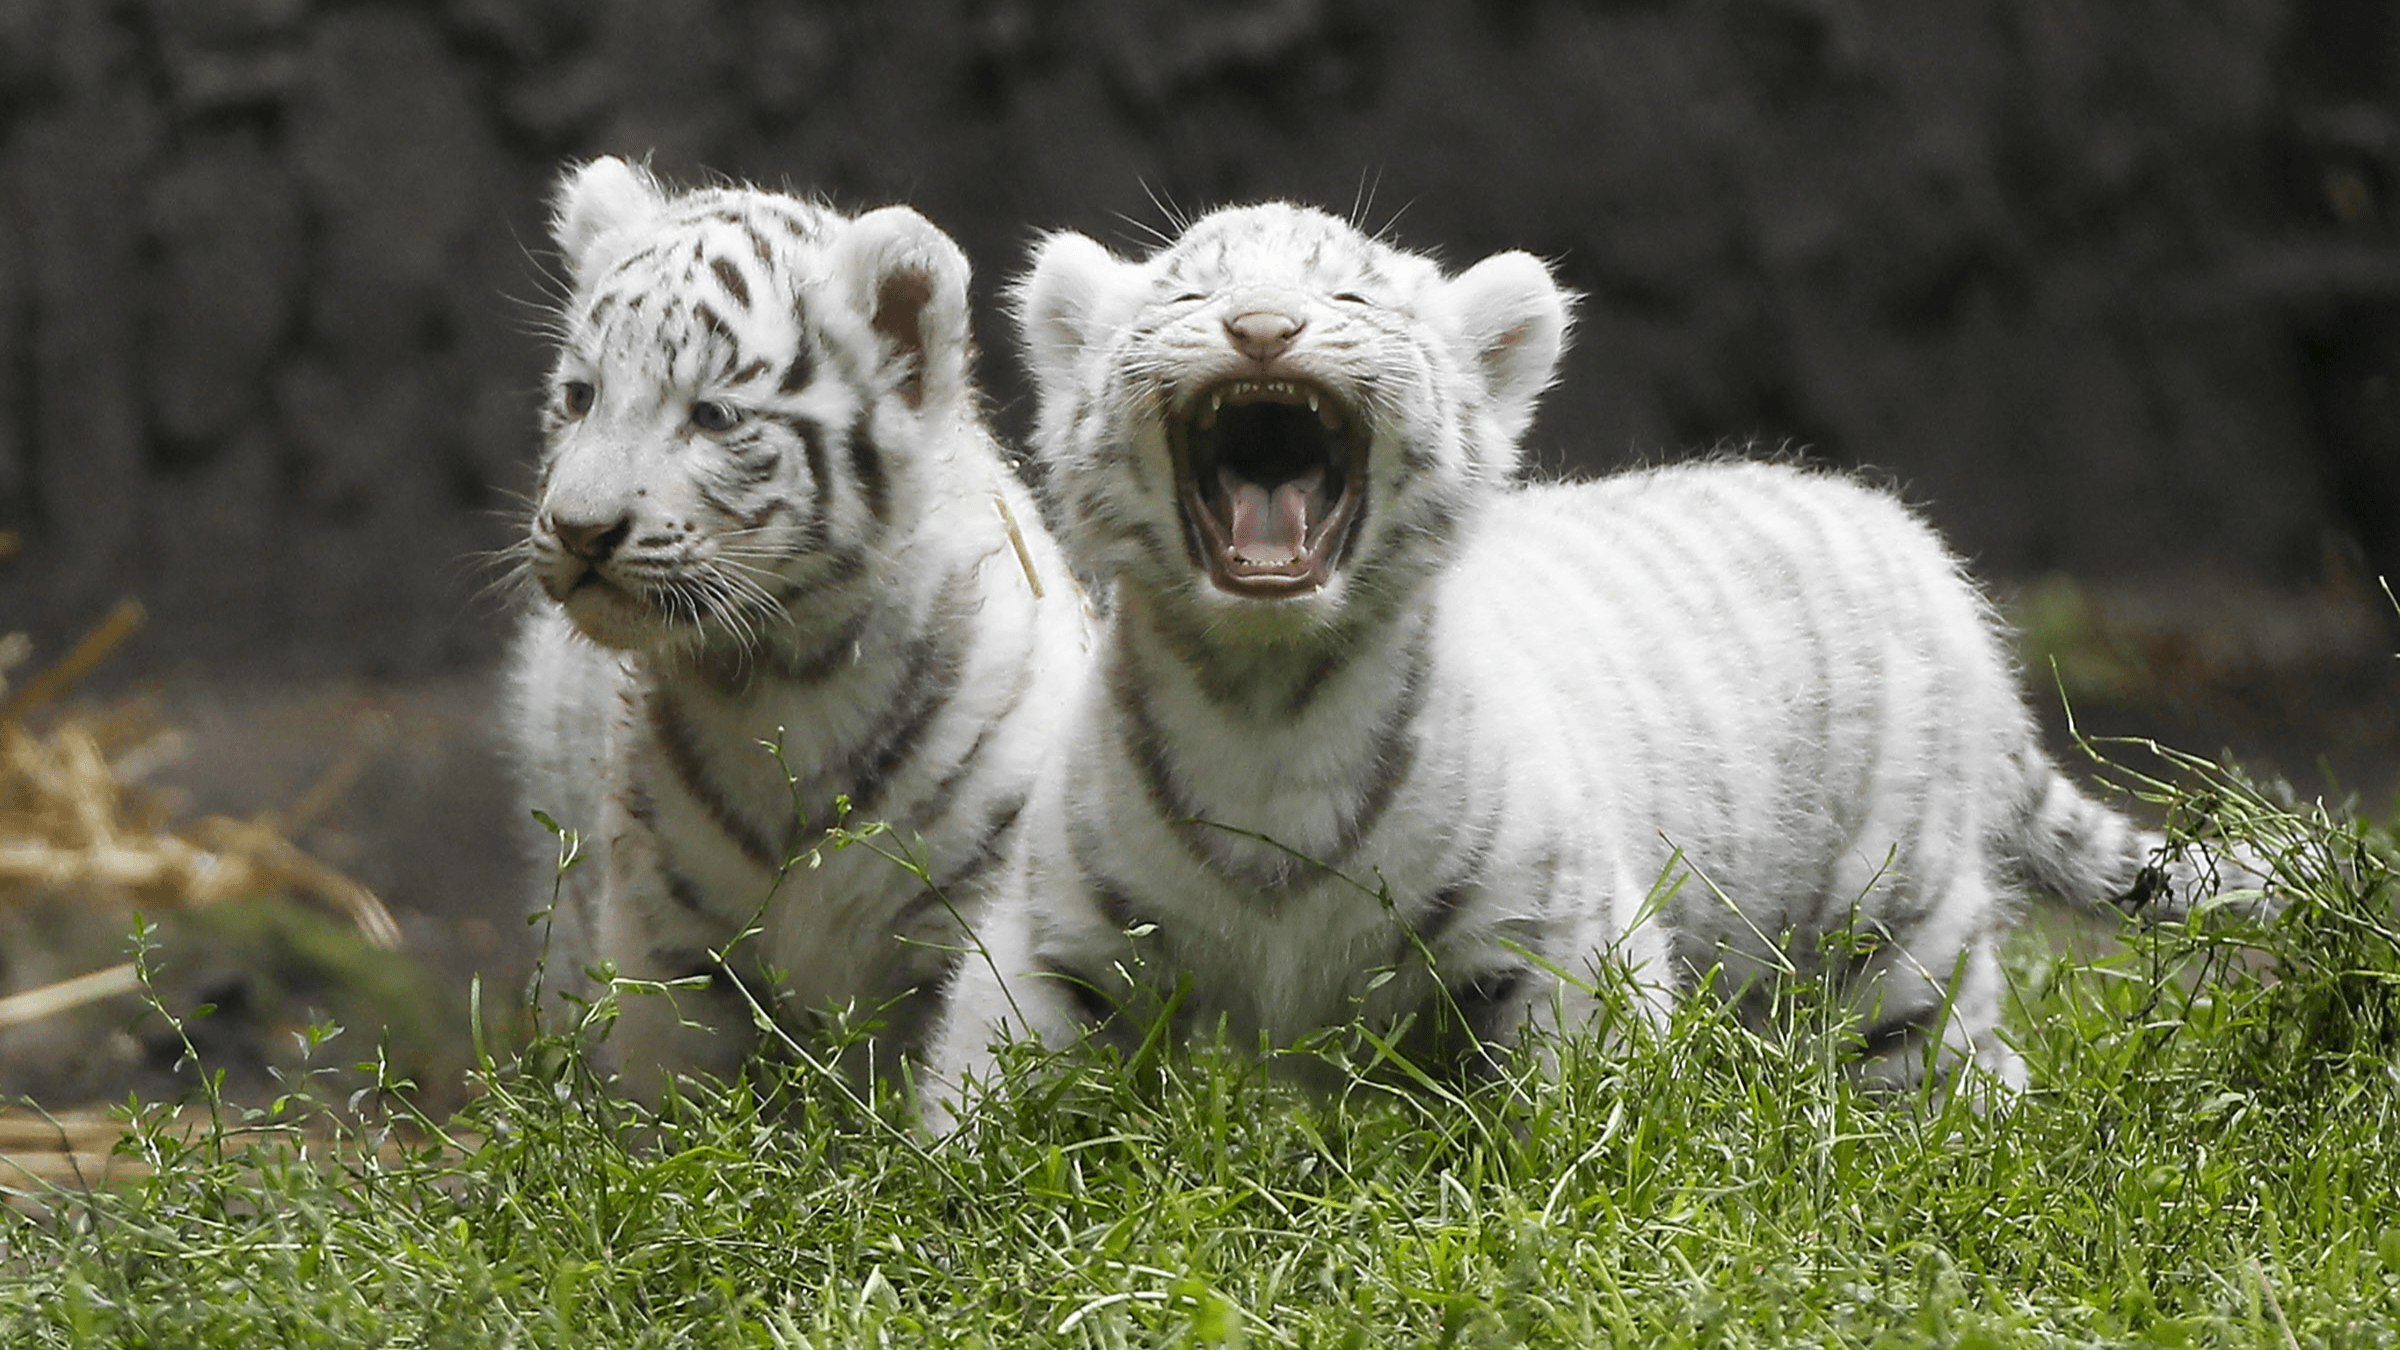 Cute White Tiger Baby Action Wallpaper